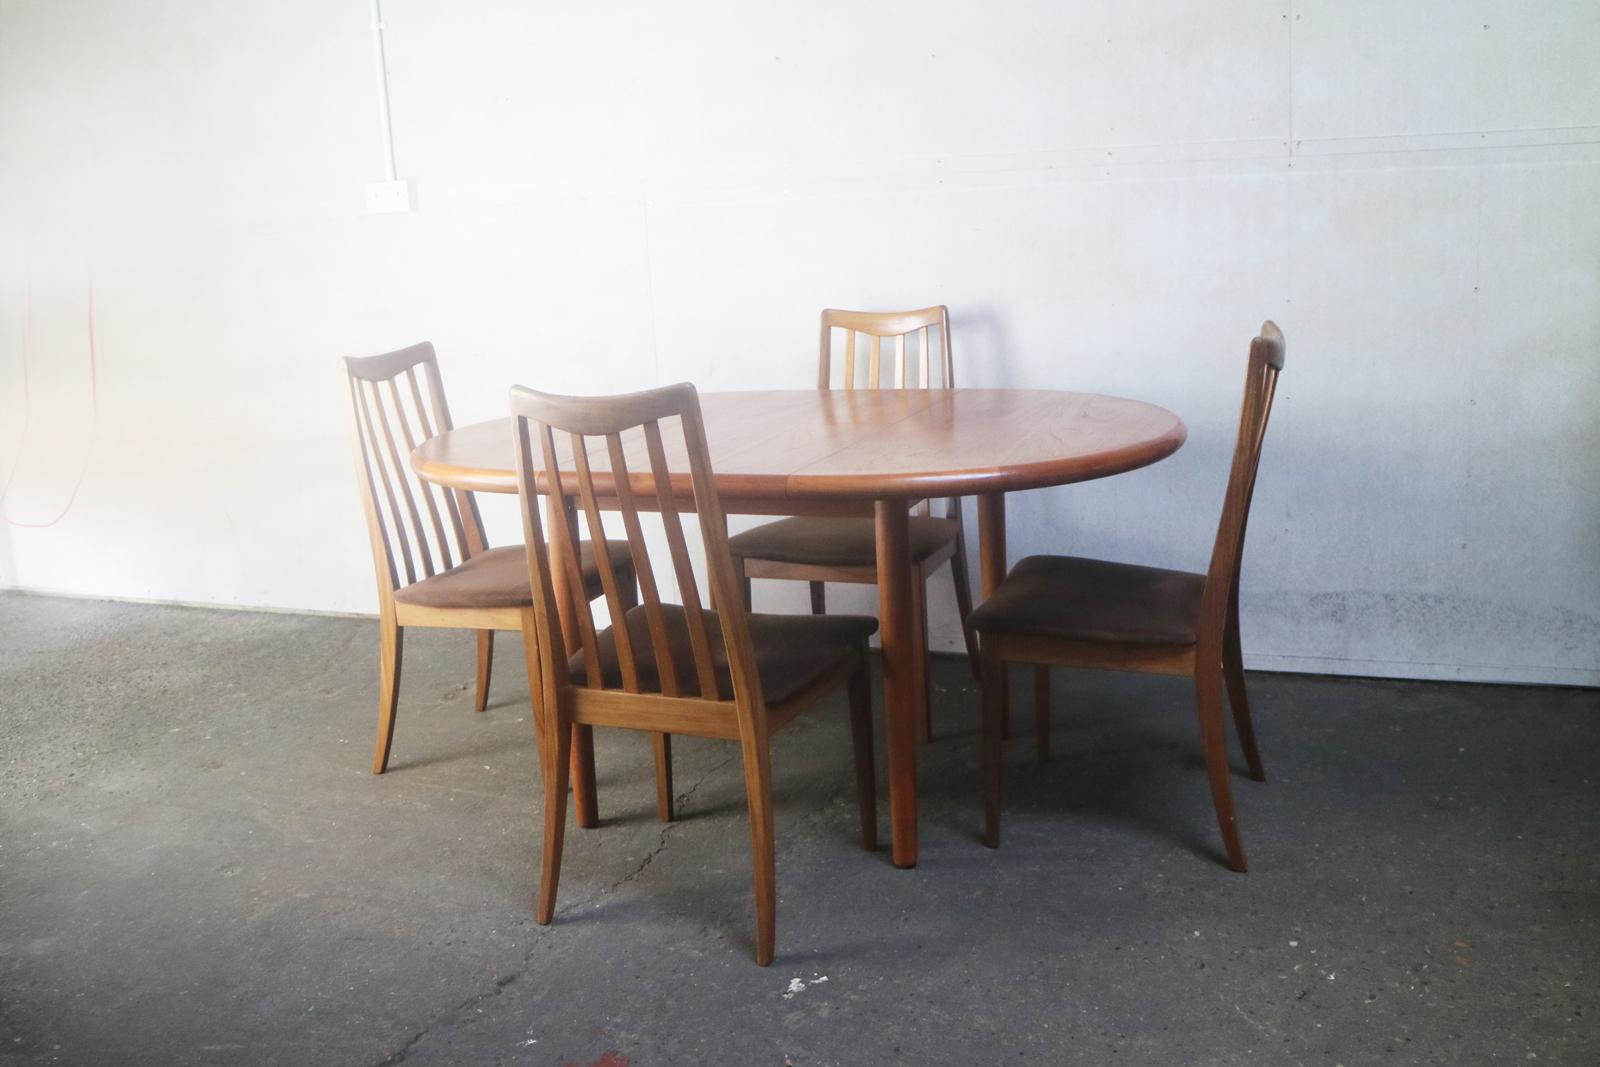 A very fine, relatively small extending Danish dining table with lovely wood grain, thick rounded edges and decorative inlaid edging. The six G Plan chairs are elegantly shaped, with brown velour seating and distinctive back rests.

Table is